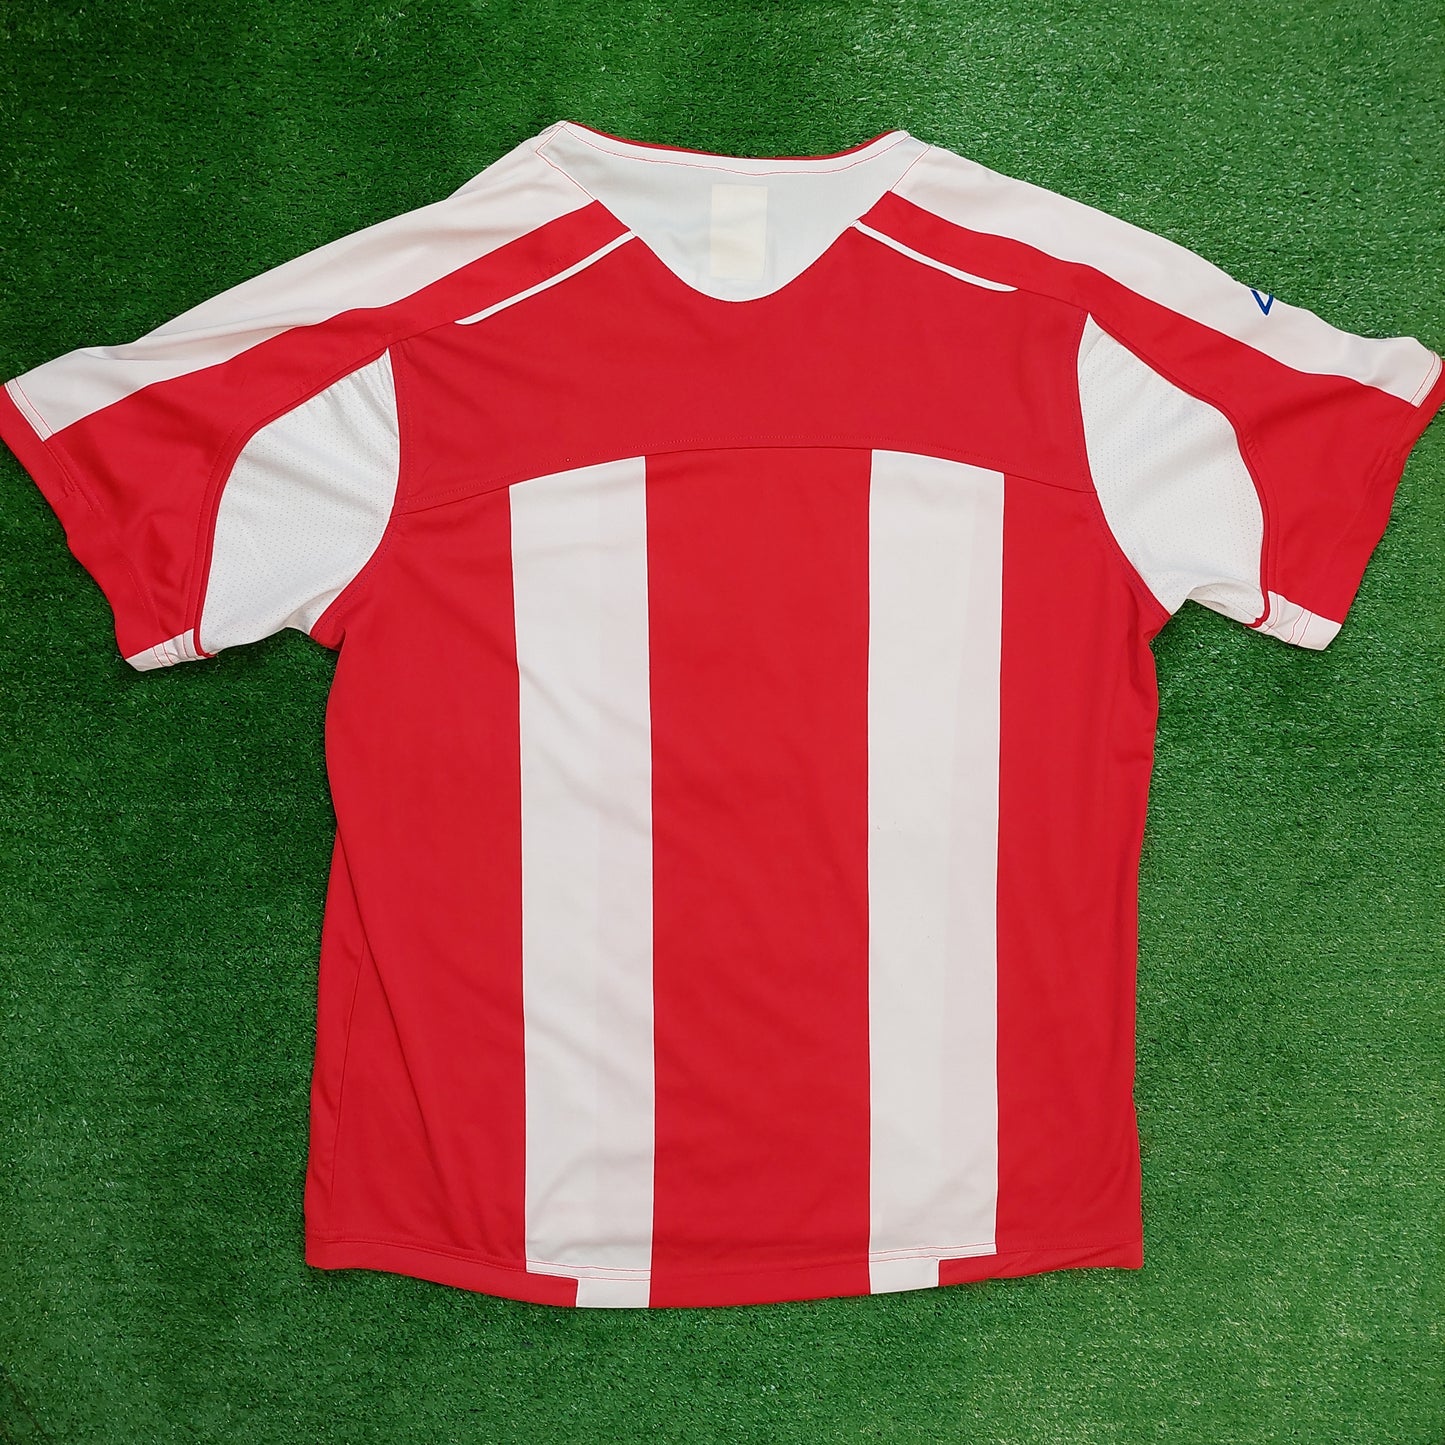 Stoke City 2008/09 Home Shirt (Very Good) - Size L